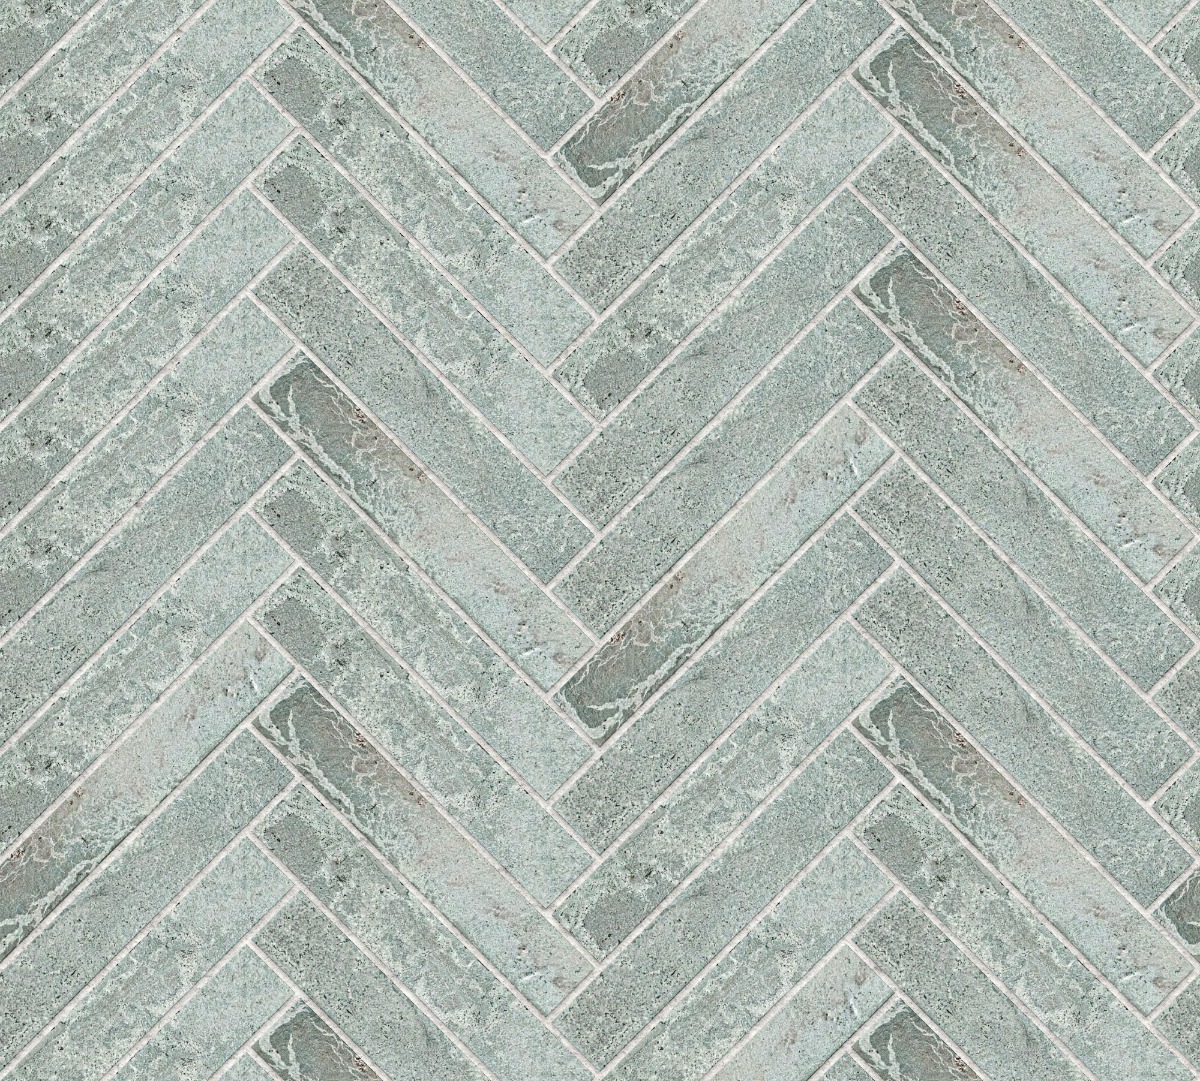 A seamless tile texture with evolve copper bau tile tiles arranged in a Herringbone pattern